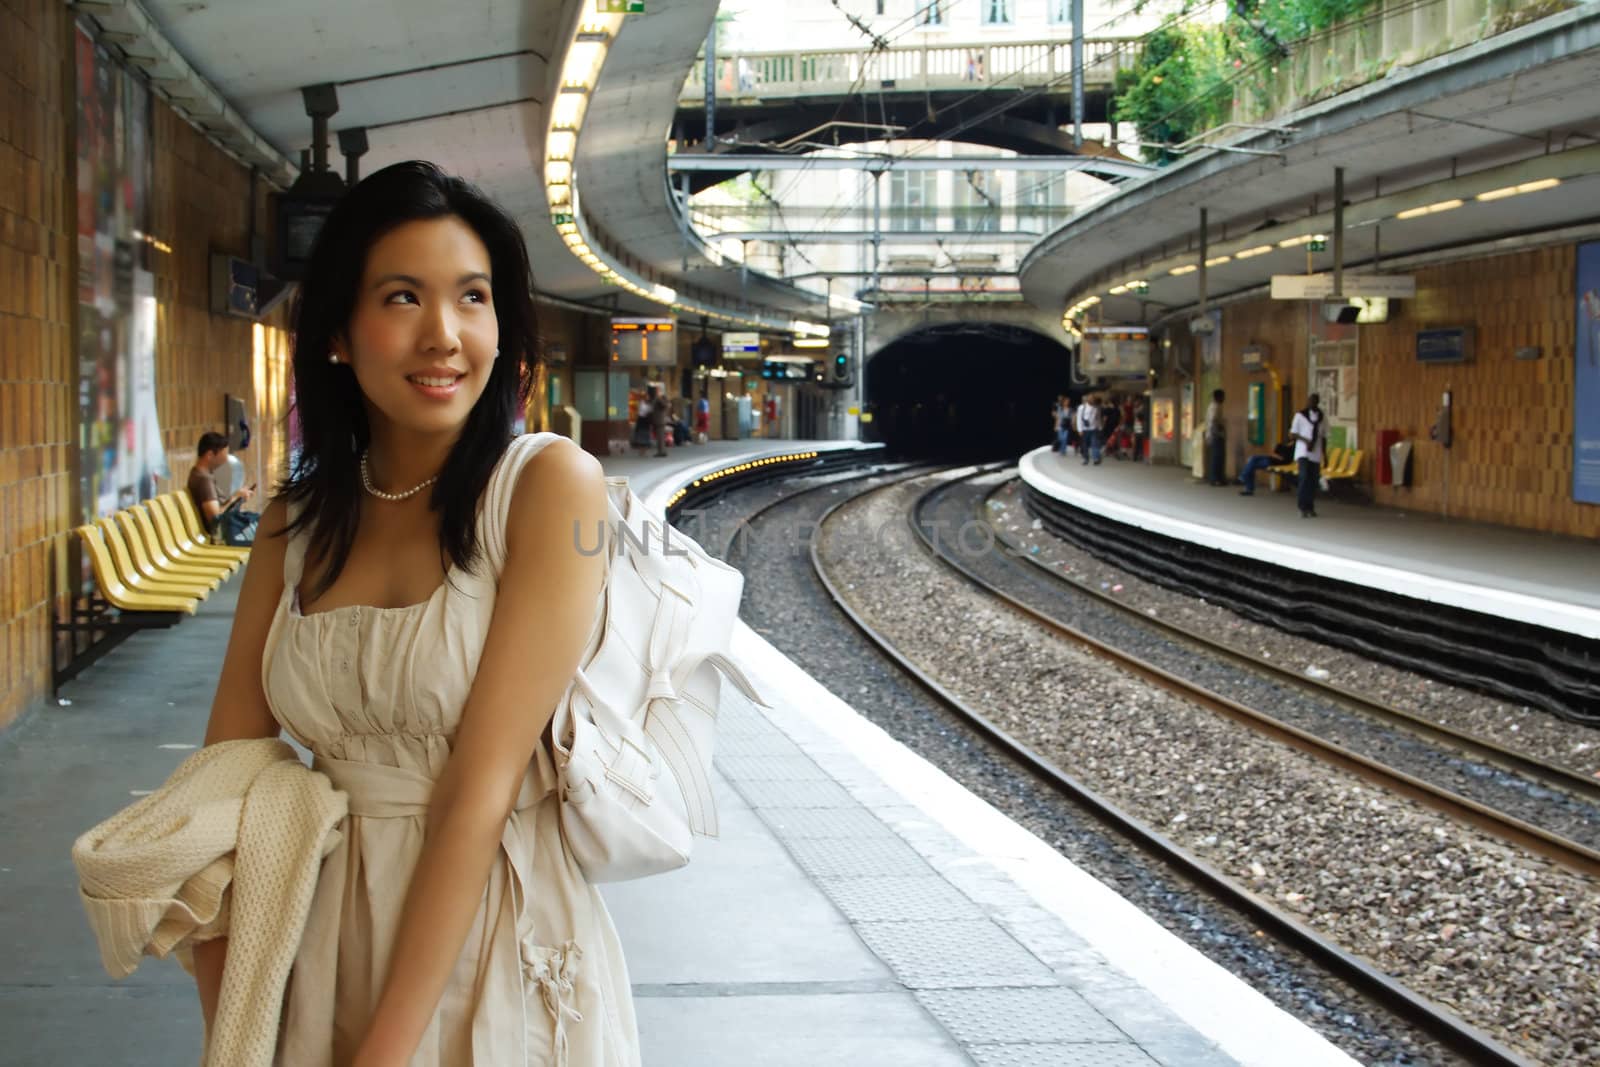 A woman waits for the train on the platform, perpective of the tracks on the right.